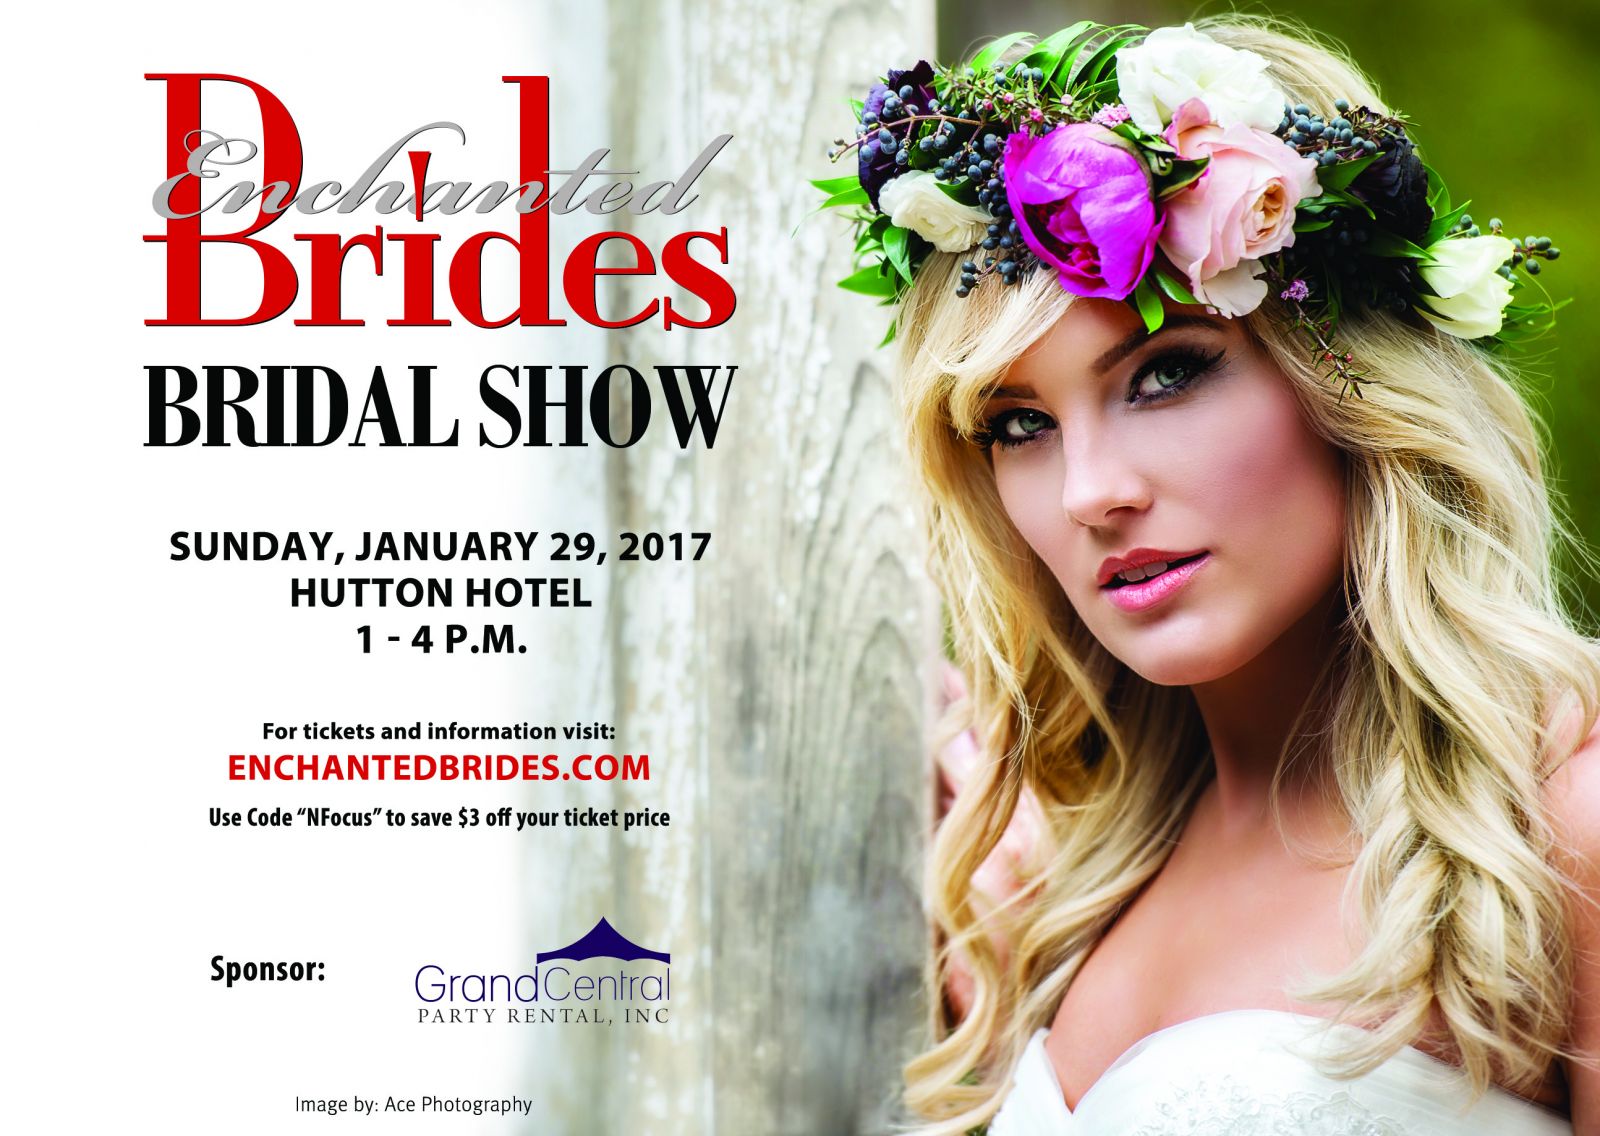 Enchanted Brides Bridal Show in Nashville at The Hutton Hotel on January 29th